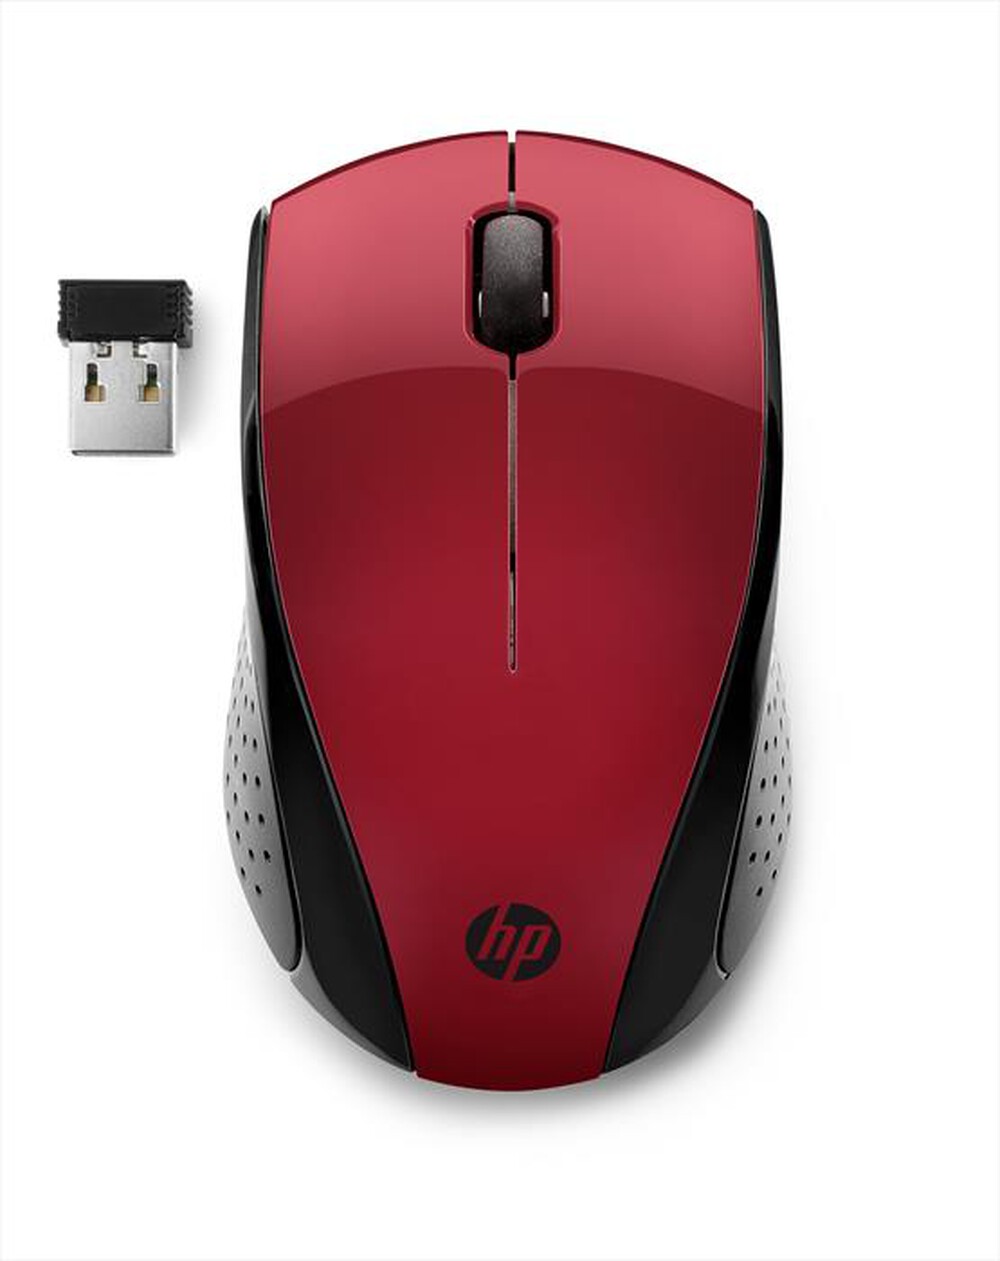 "HP - WIRELESS MOUSE 220-Red"